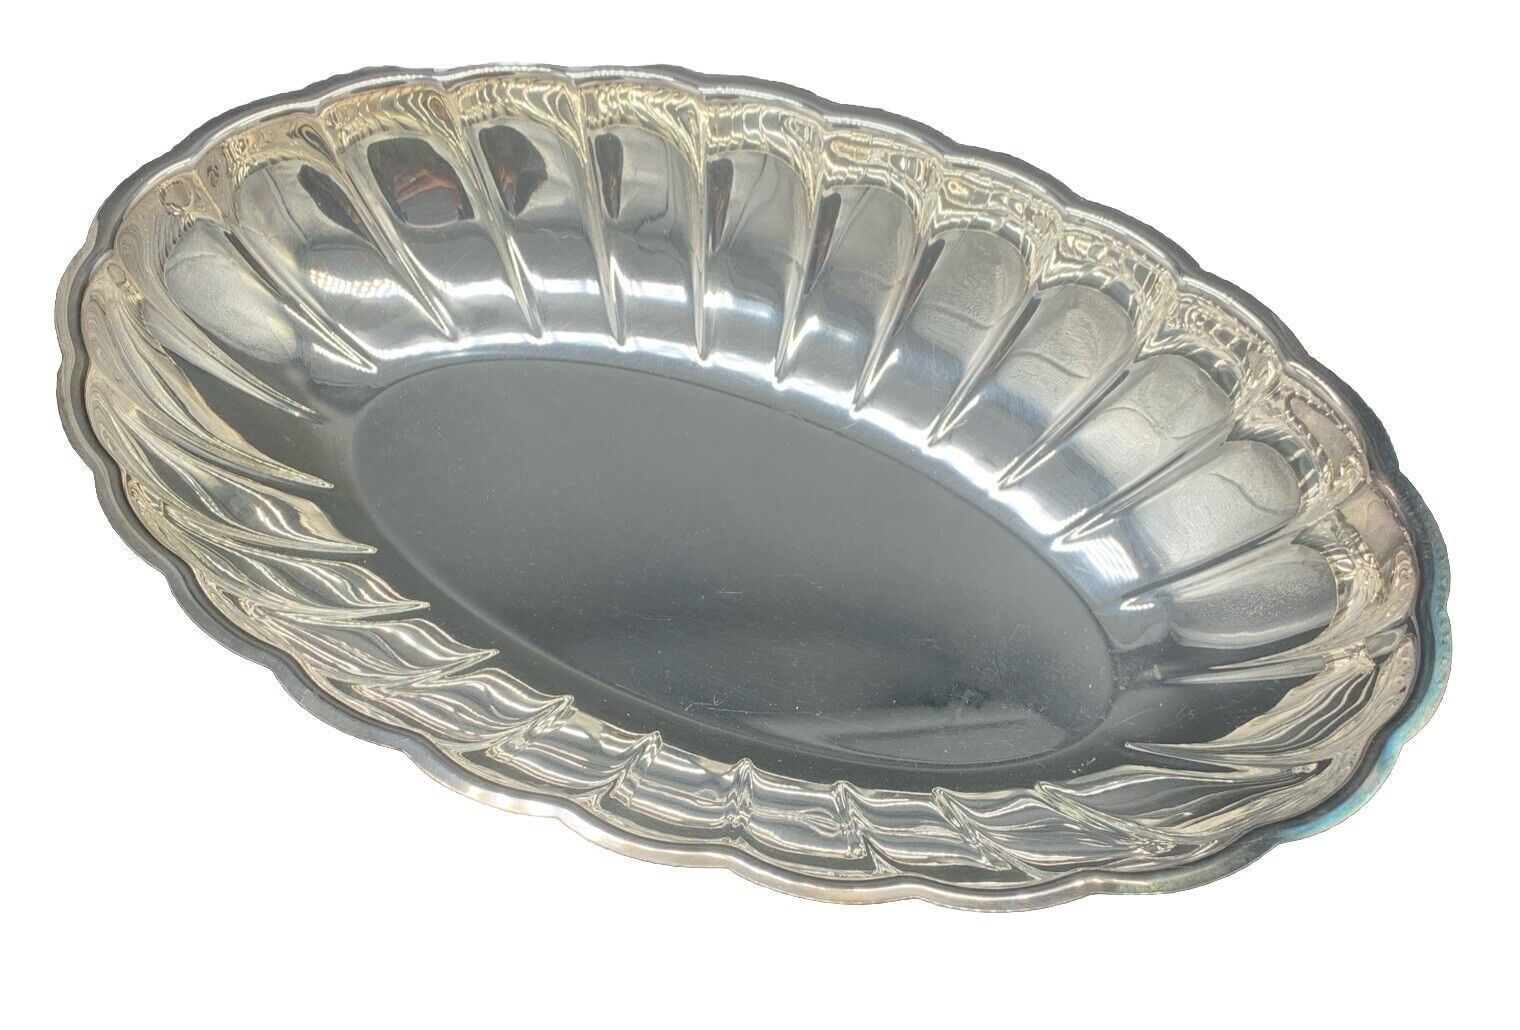 Vintage WM.A Rogers Oval Scalloped Silver Plated Serving Dish Bowl